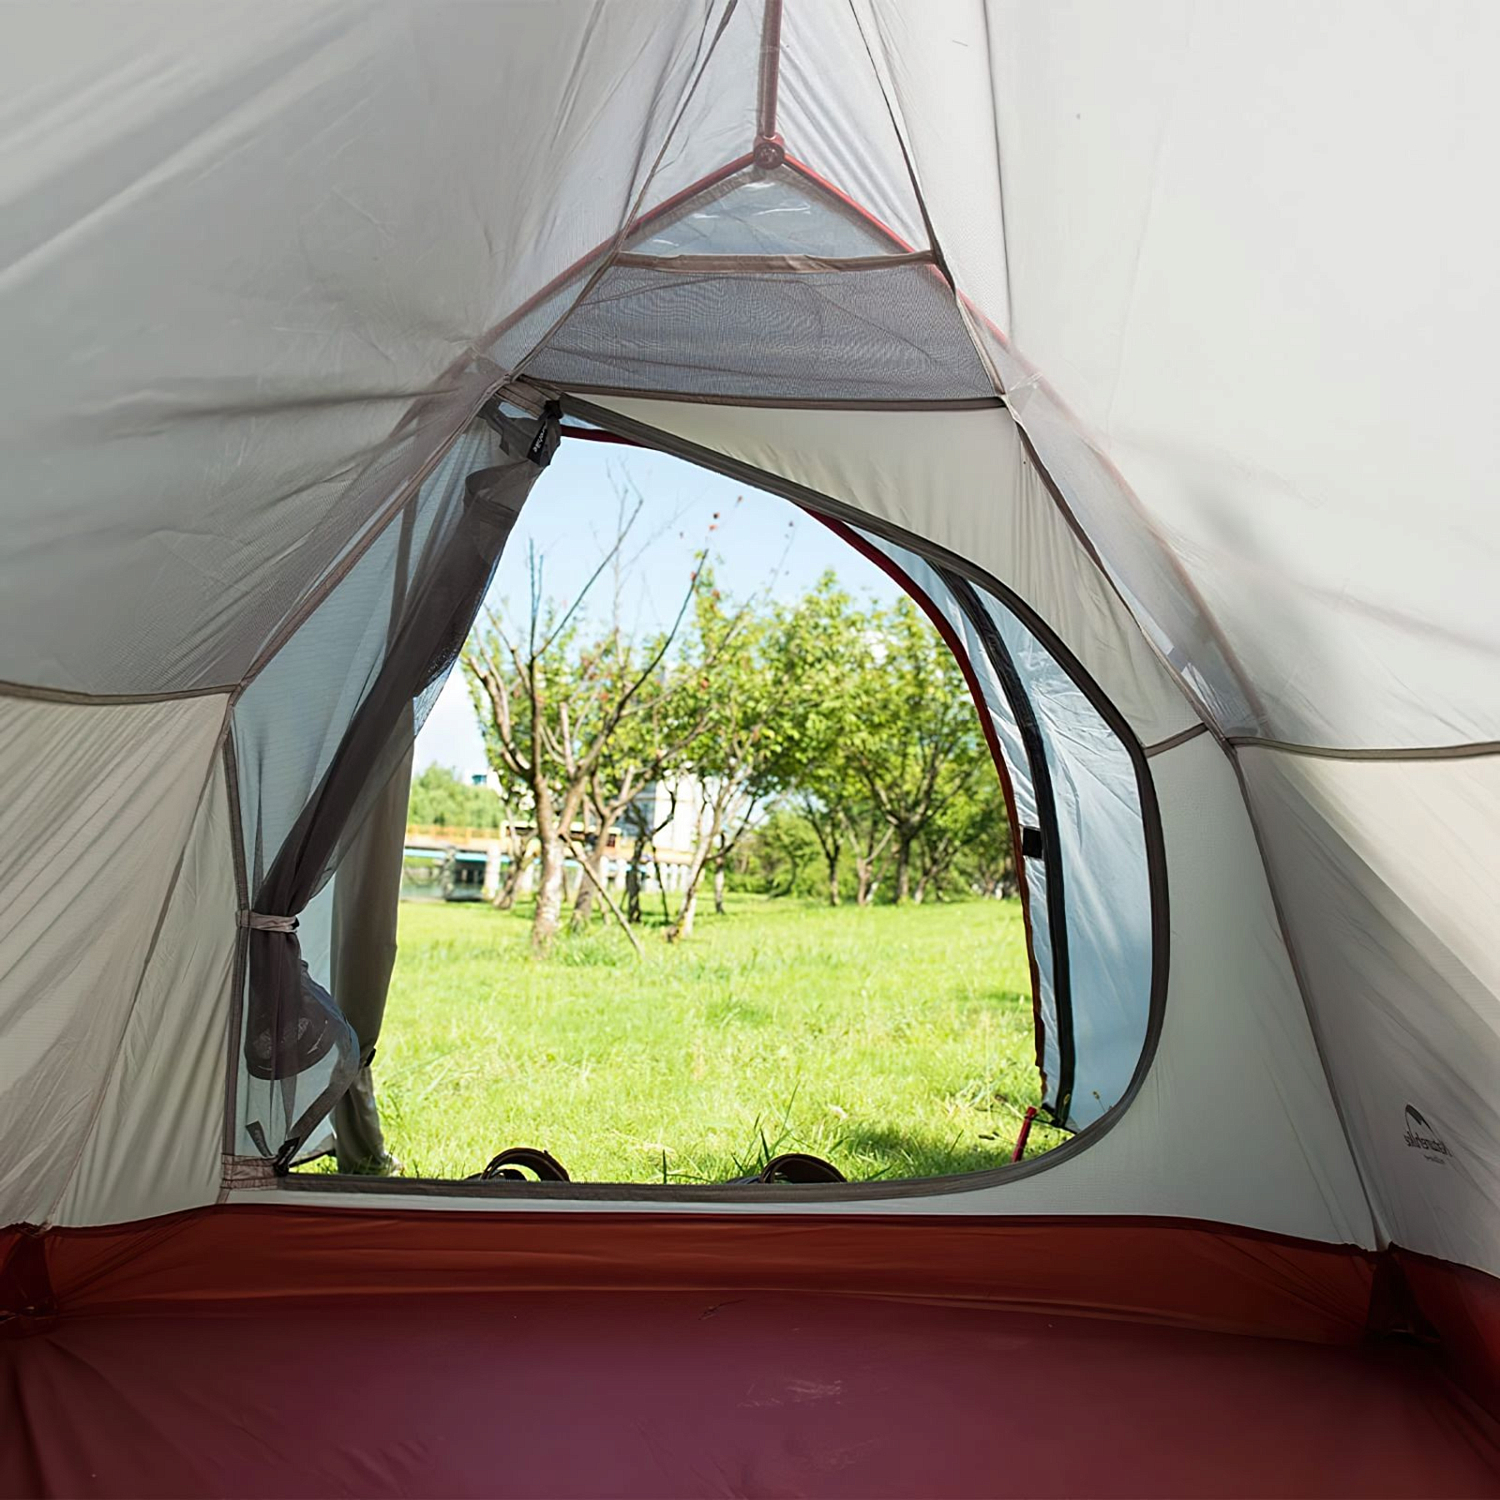 Палатка Naturehike Updated Cloud Up 2 Tent-New Version 20D Gray